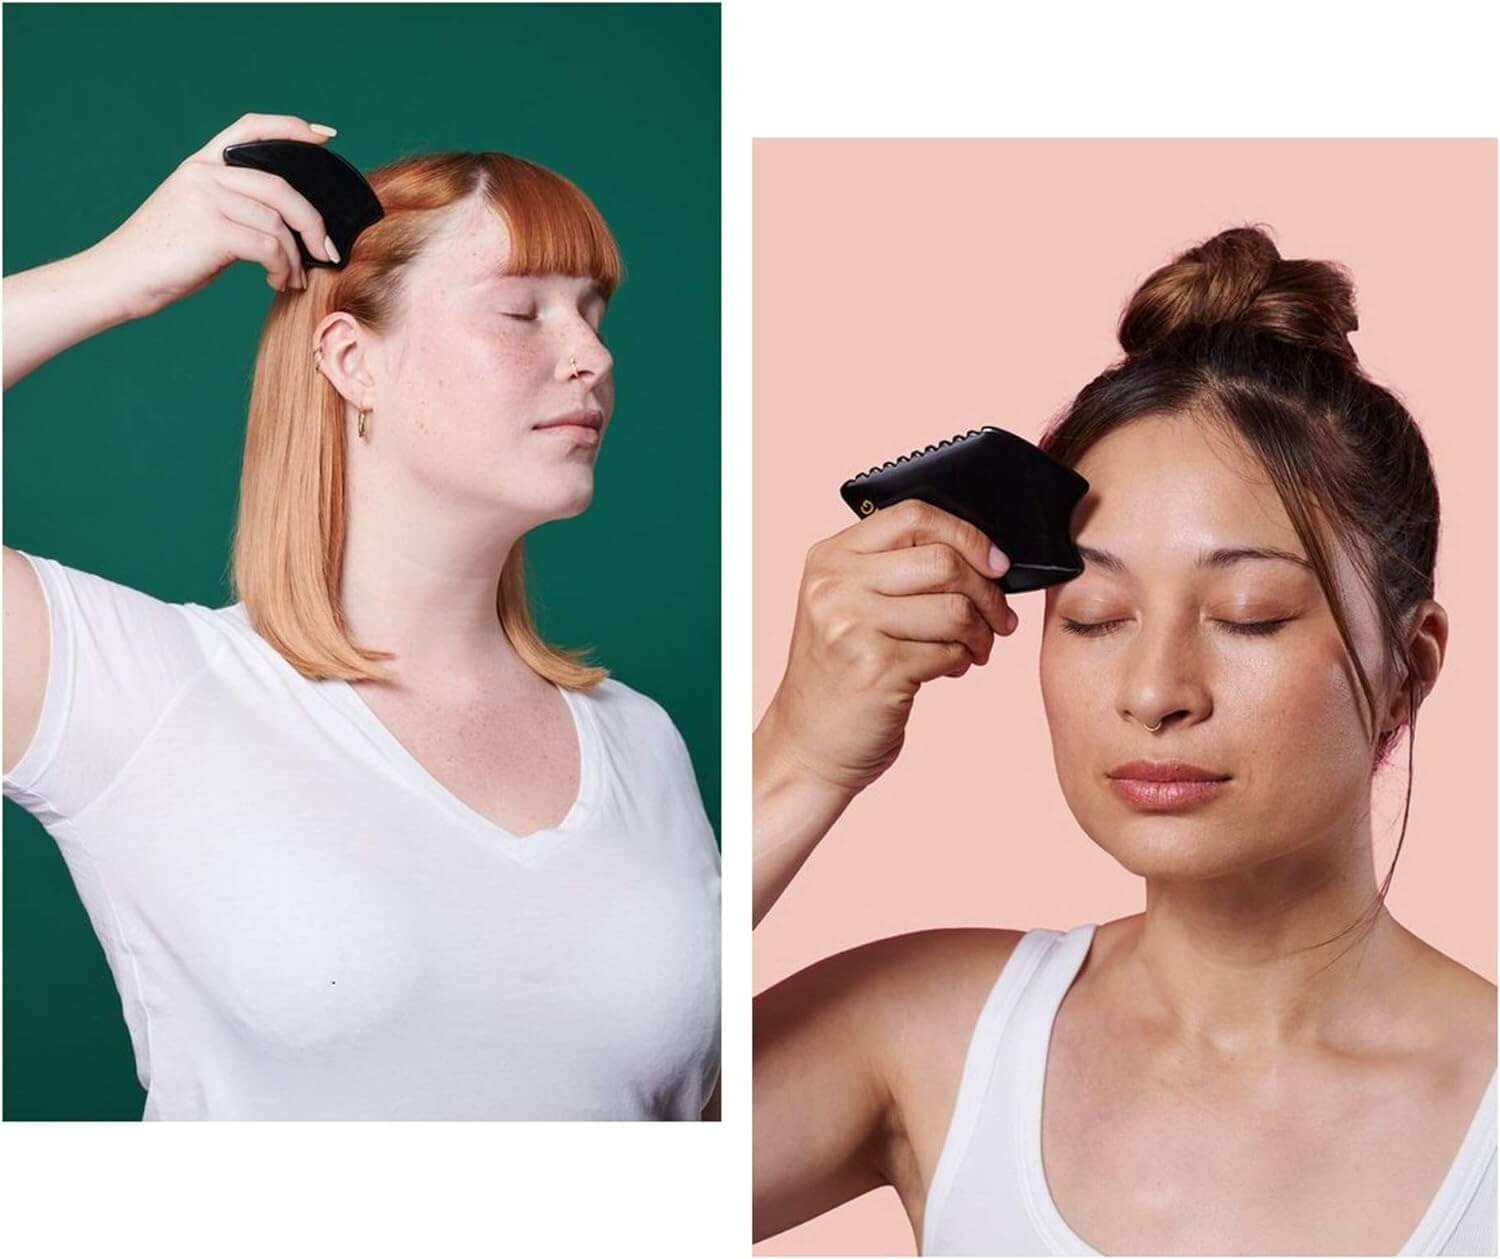 Two models using the Bian Stone Gua Sha on their heads